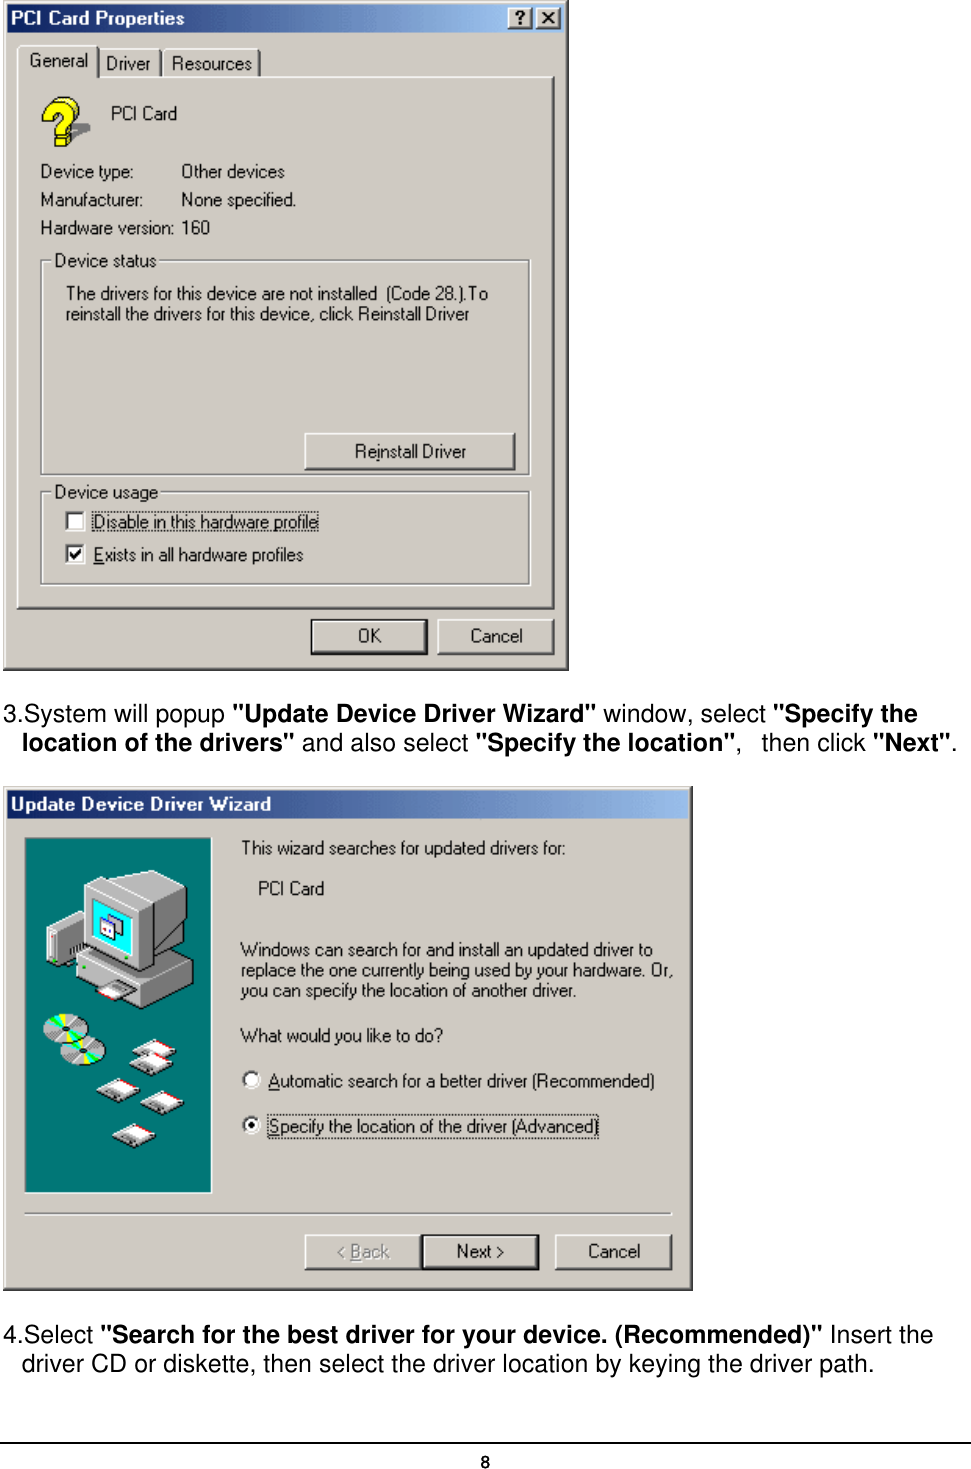   8 3.System will popup &quot;Update Device Driver Wizard&quot; window, select &quot;Specify the location of the drivers&quot; and also select &quot;Specify the location&quot;,   then click &quot;Next&quot;.  4.Select &quot;Search for the best driver for your device. (Recommended)&quot; Insert the driver CD or diskette, then select the driver location by keying the driver path. 